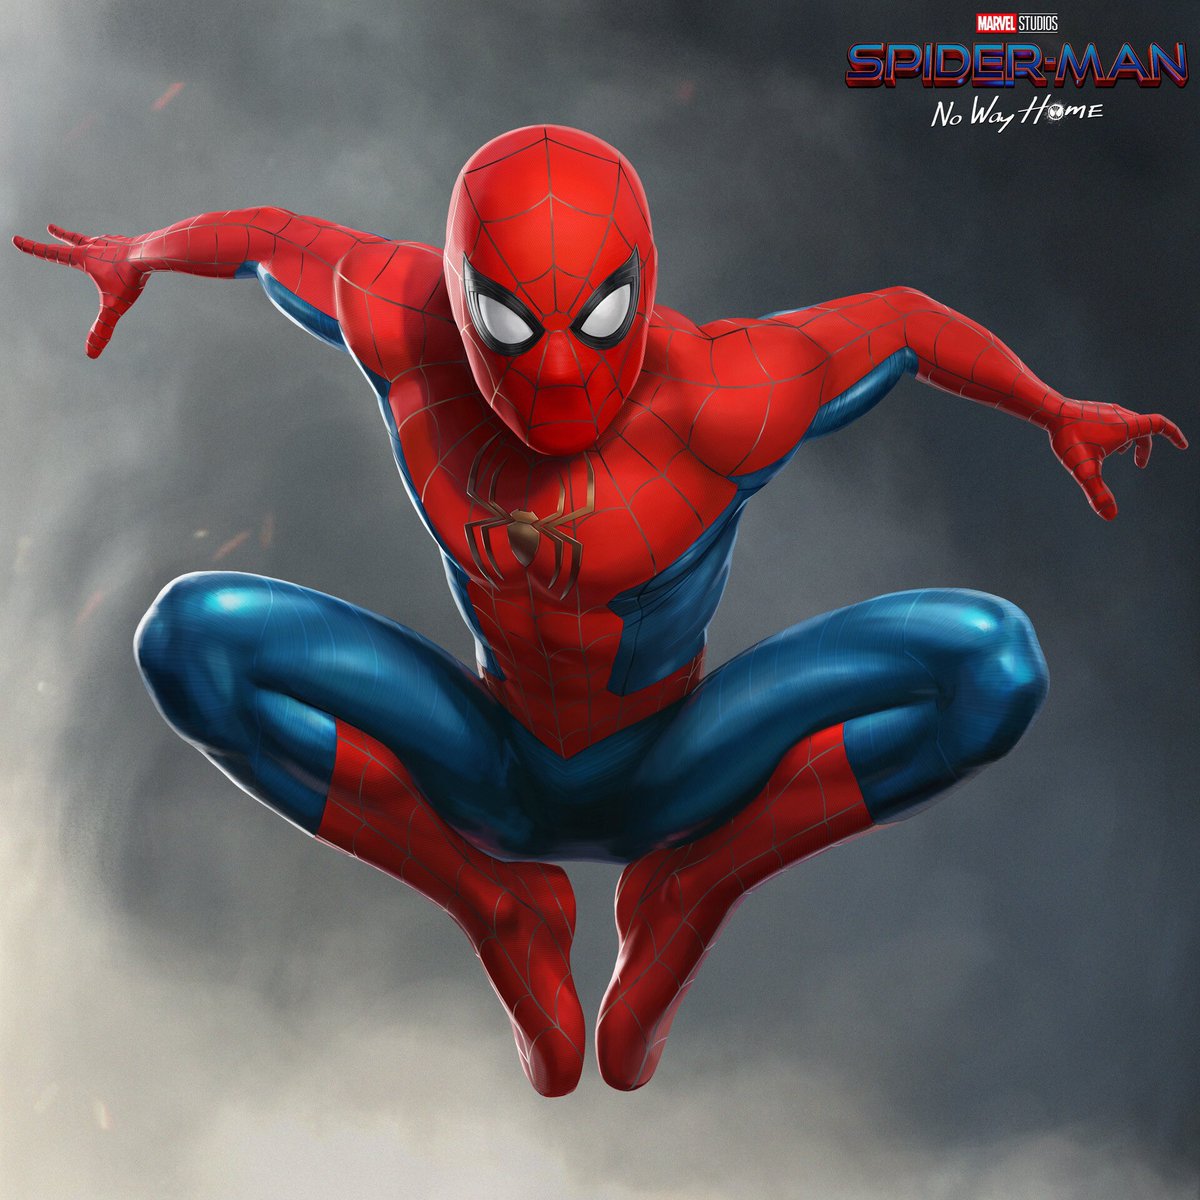 RT @blurayangel: Really hoping Tom Holland keeps this Spider-Man suit for Spider-Man 4 https://t.co/WVcjPhAAwv